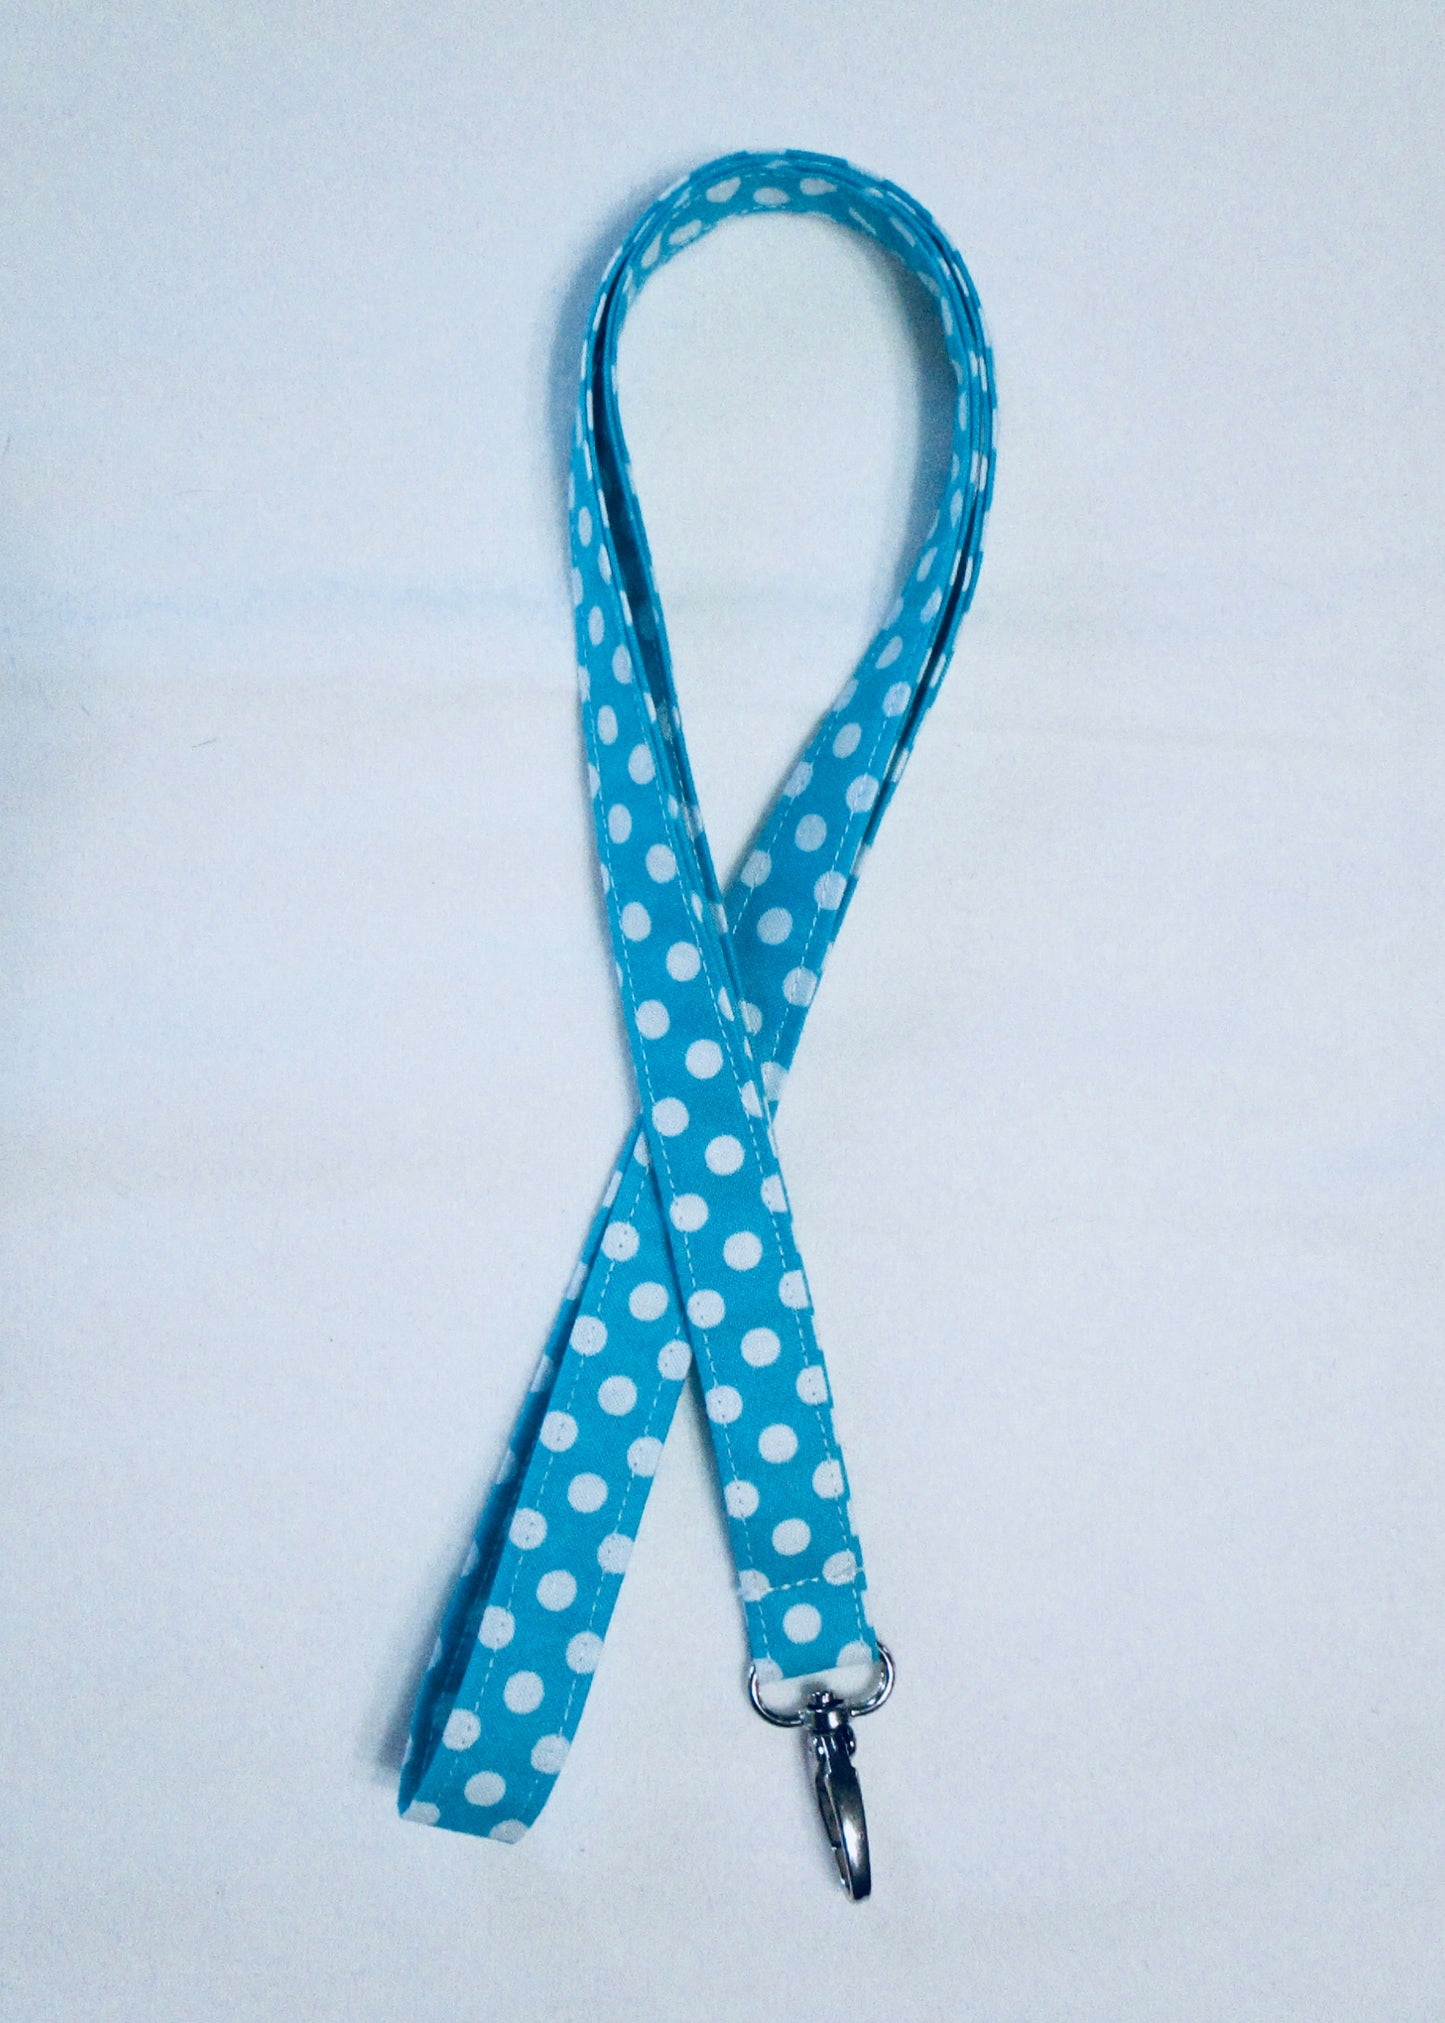 Polka Dot Seamless Cotton Lanyard - Choose from 4 Bright Color Options - Beachside Knits N Quilts